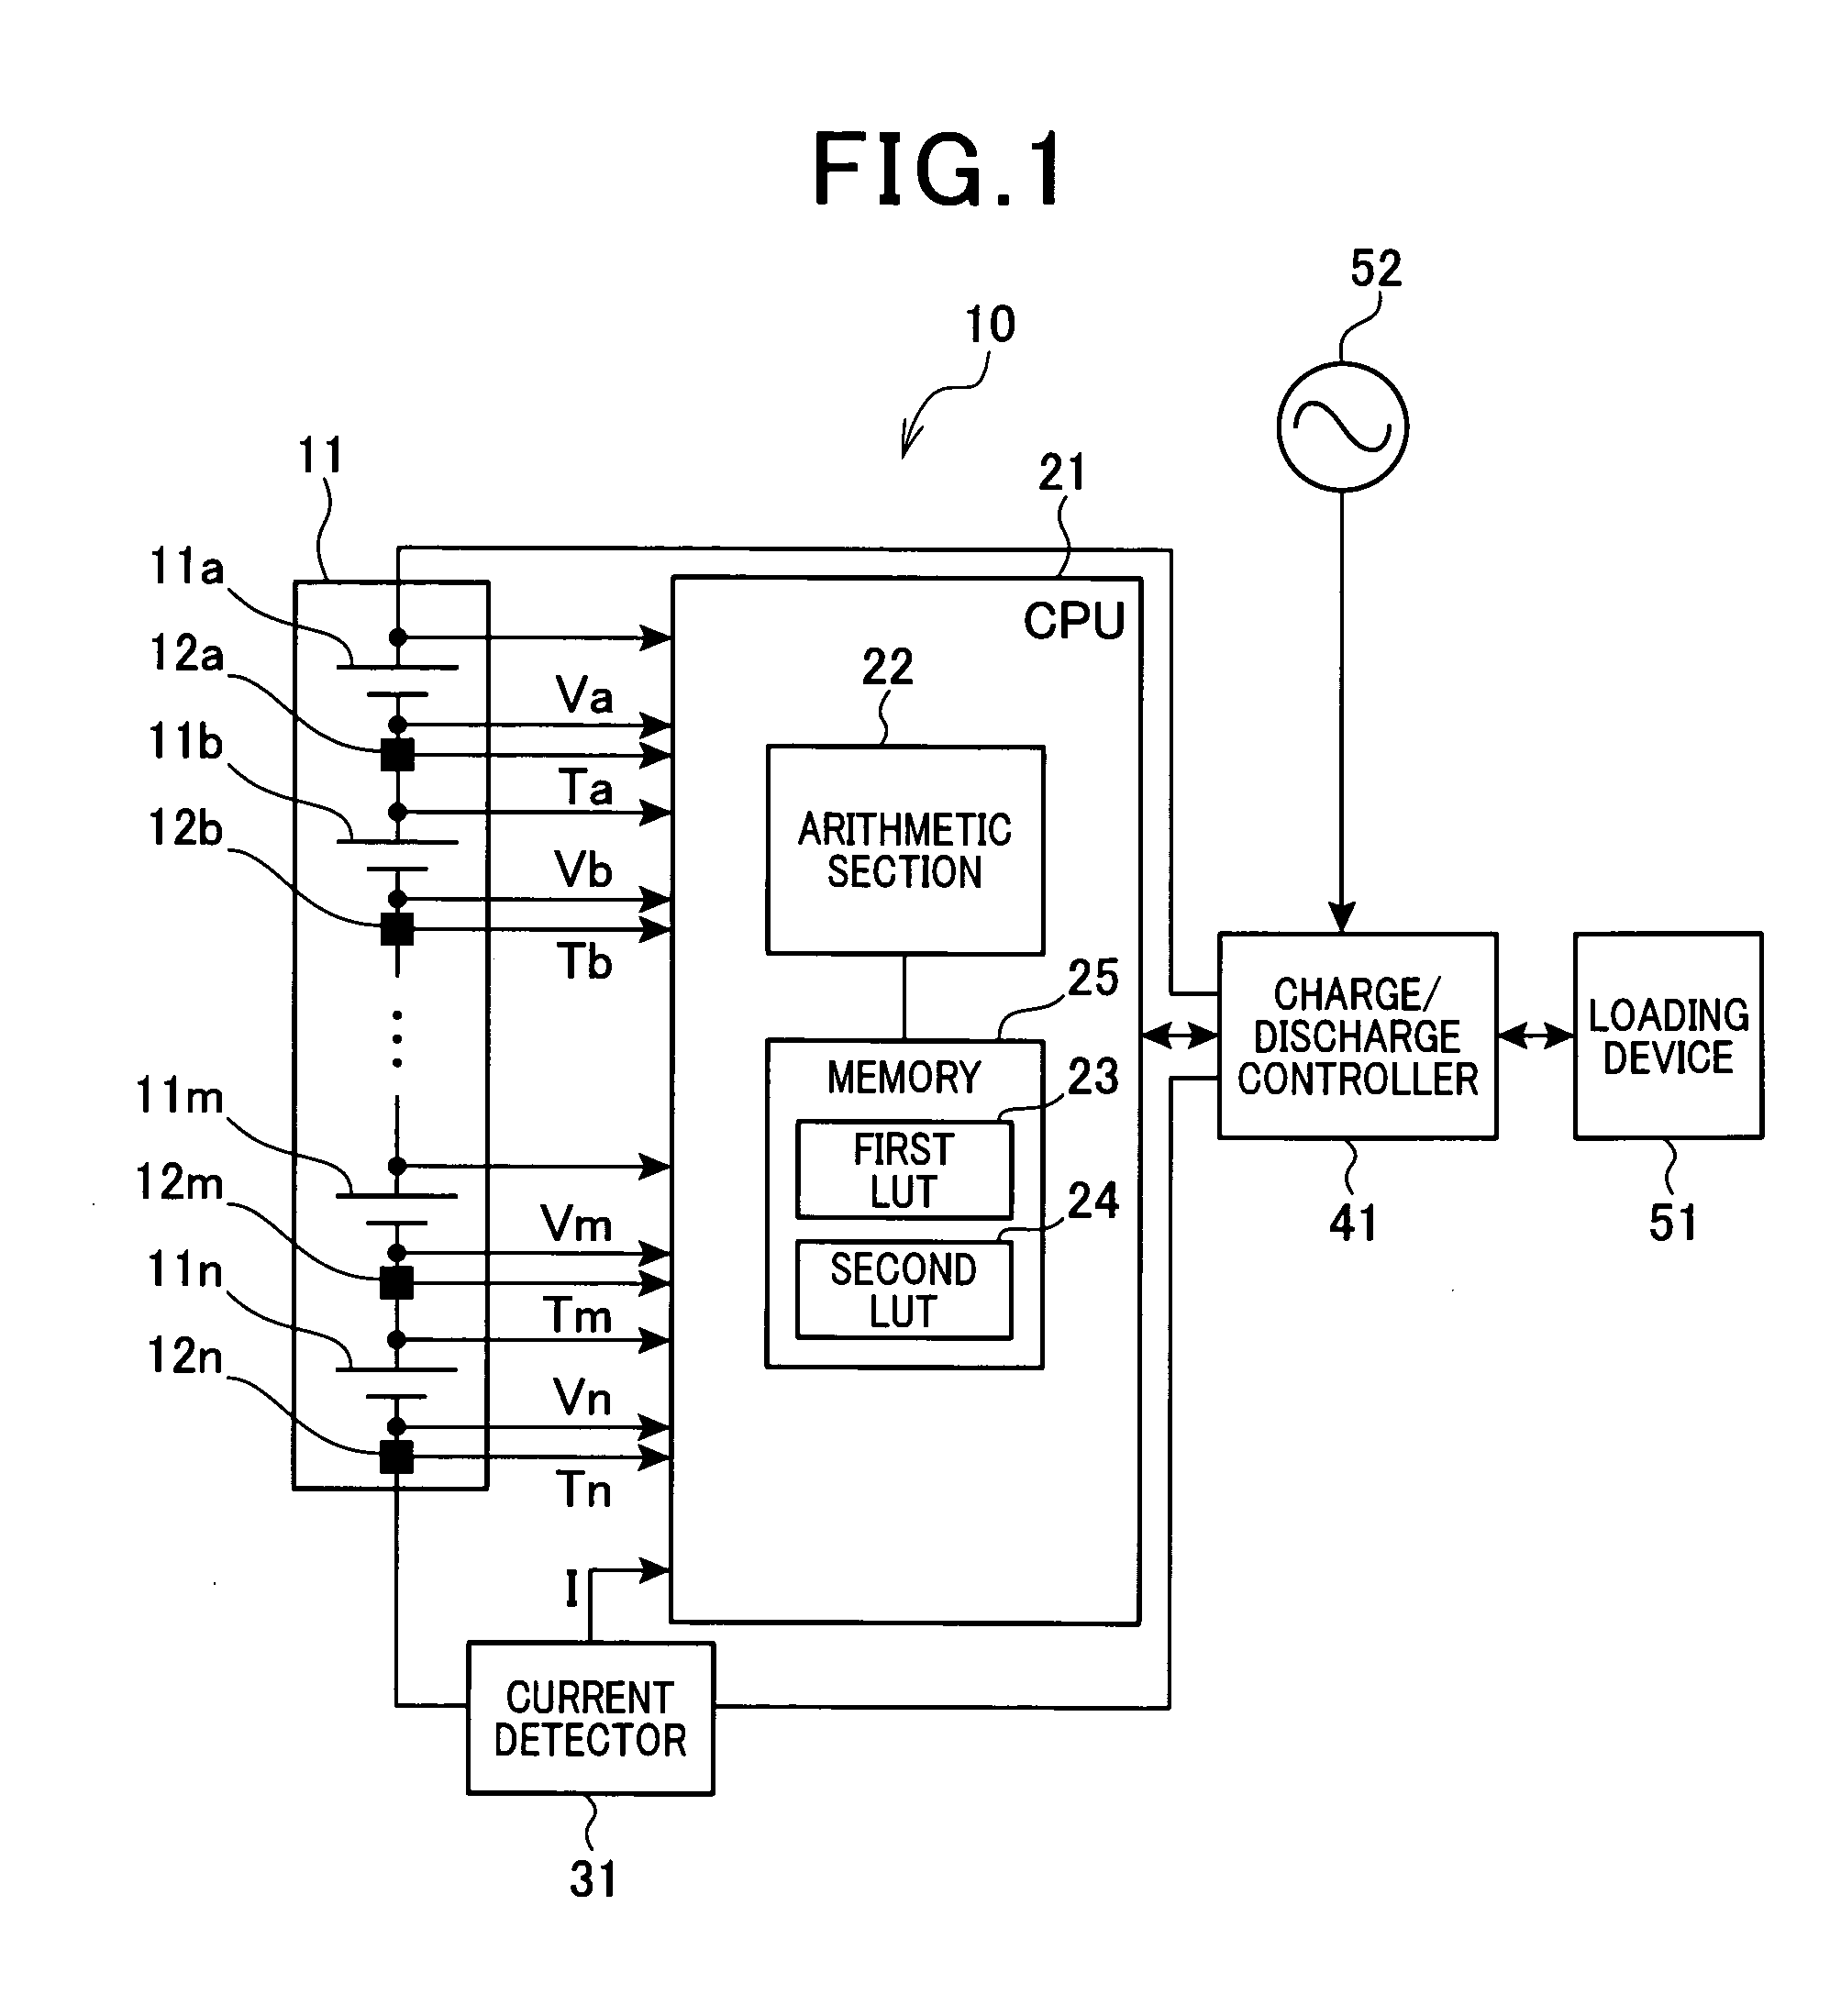 Apparatus for calculating residual capacity of secondary battery